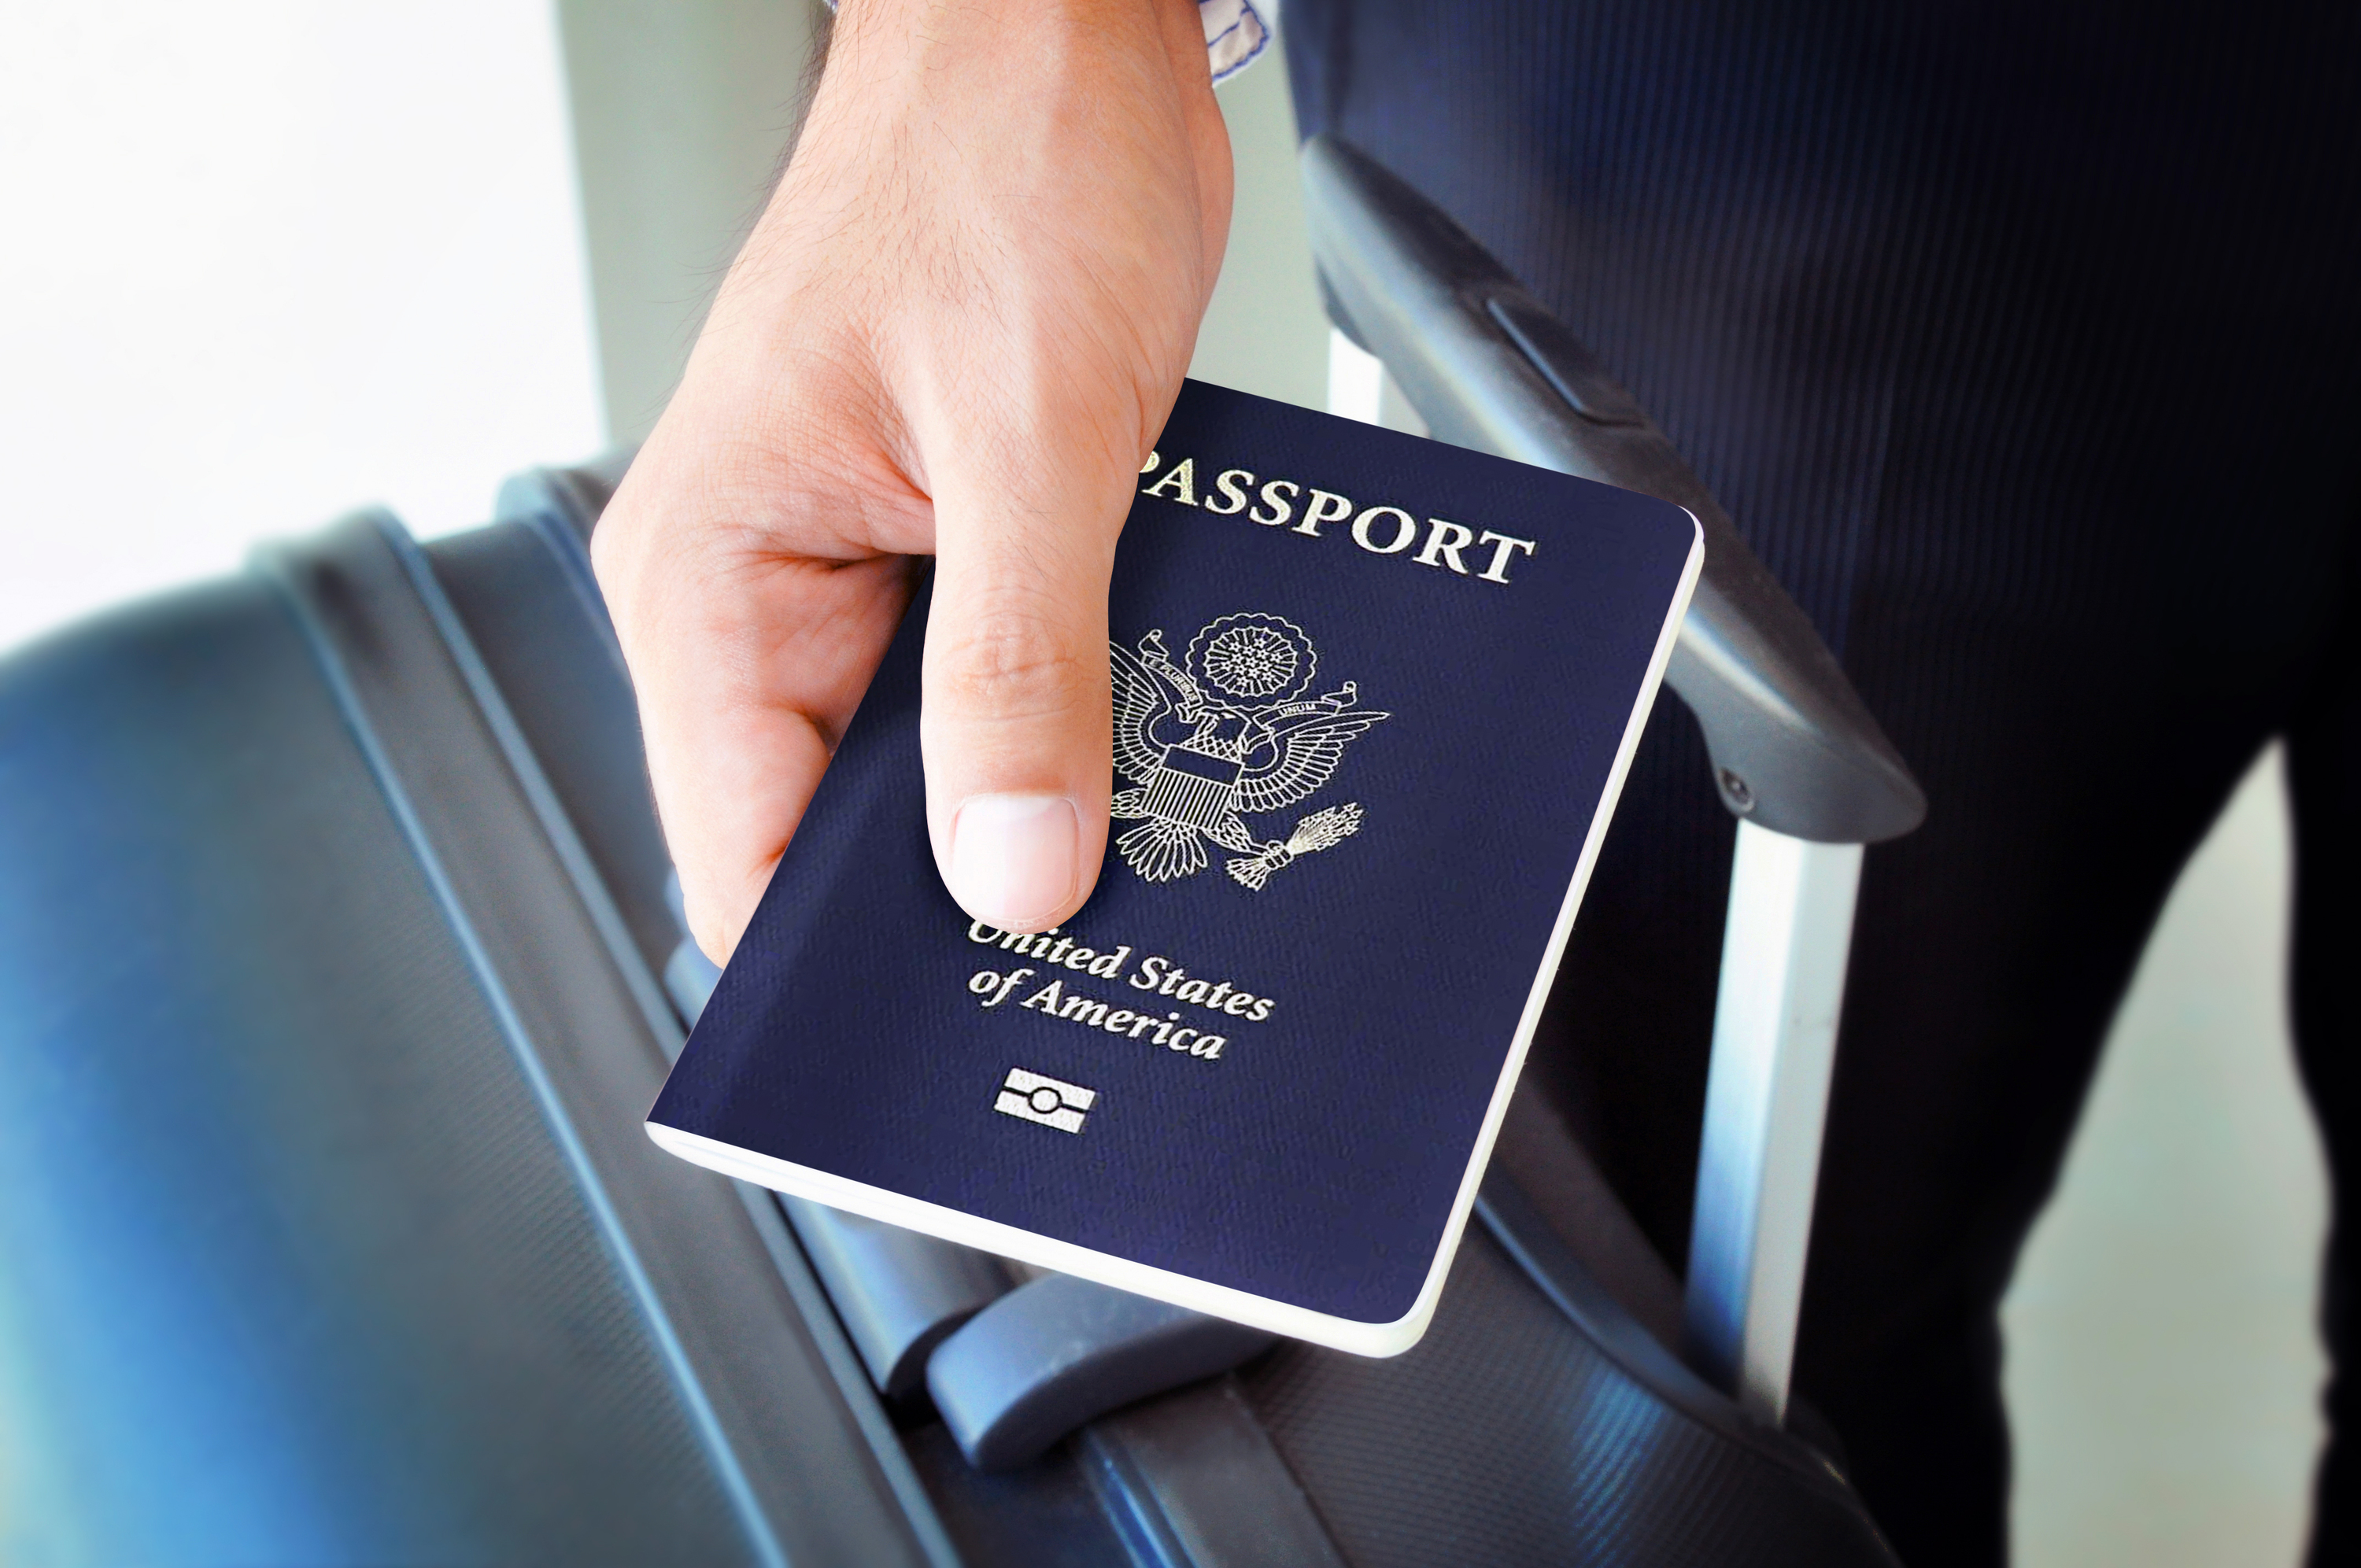 How to Get Global Entry  Tips & Tricks for Applying & Maximizing